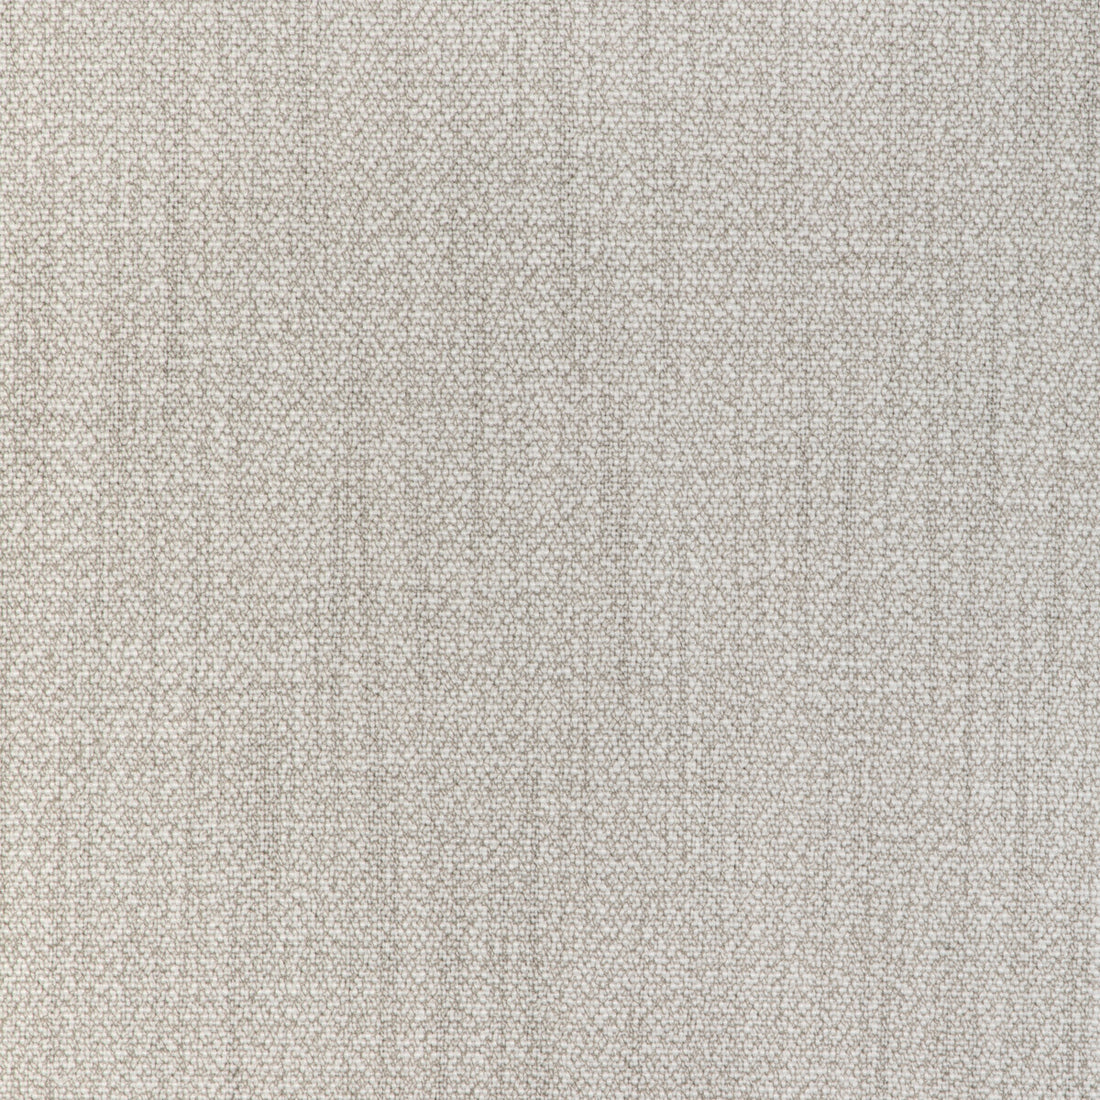 Milos Texture fabric in ivory color - pattern 36920.116.0 - by Kravet Couture in the Riviera collection